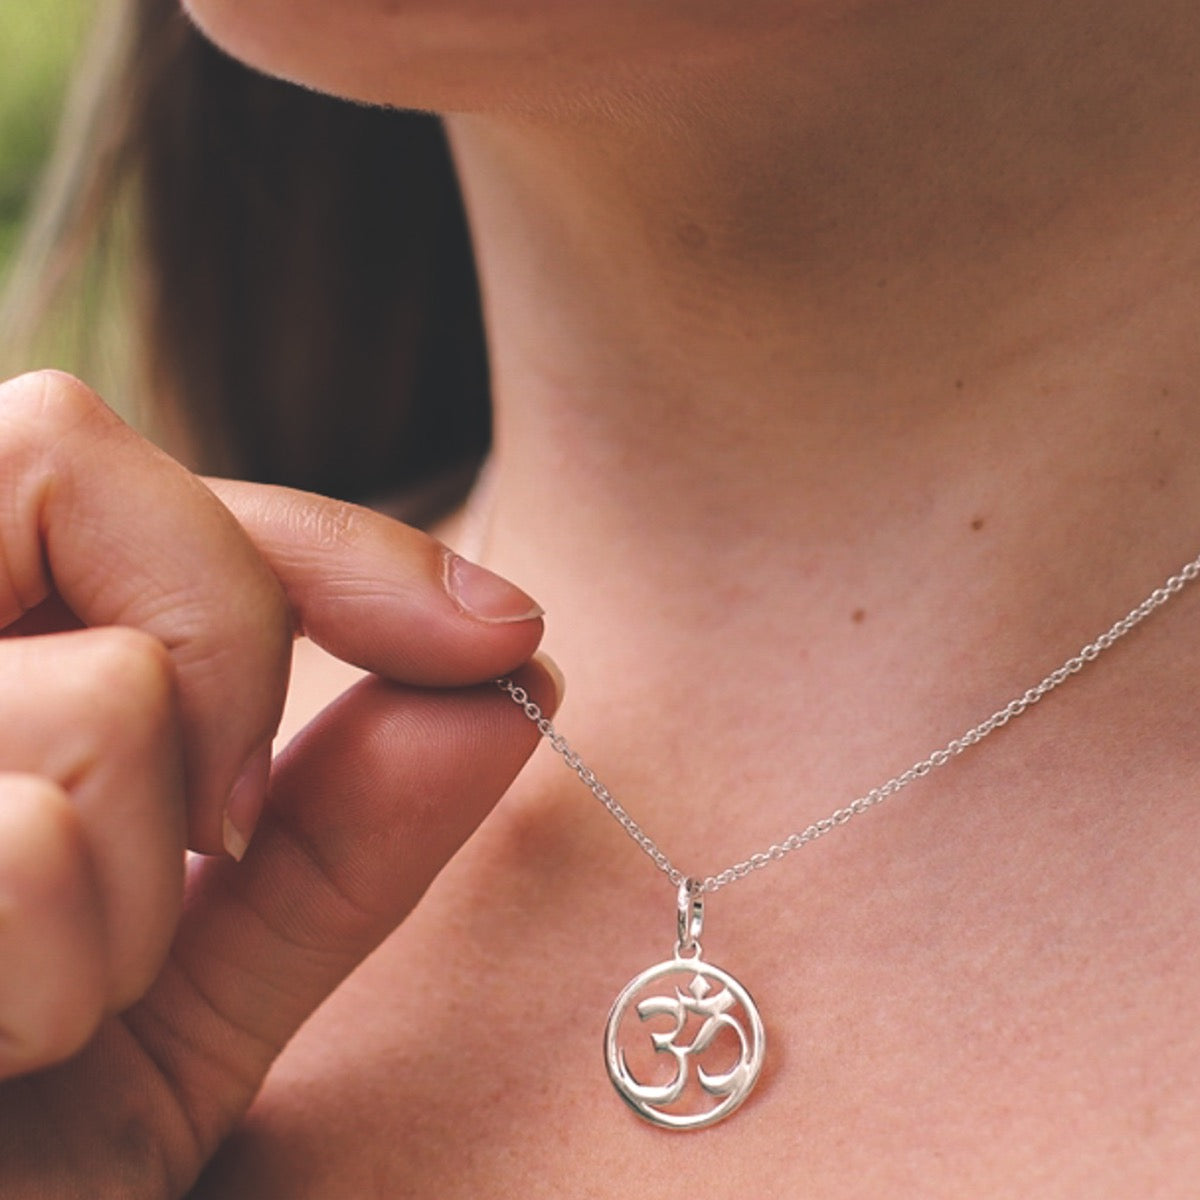 Silver om necklace